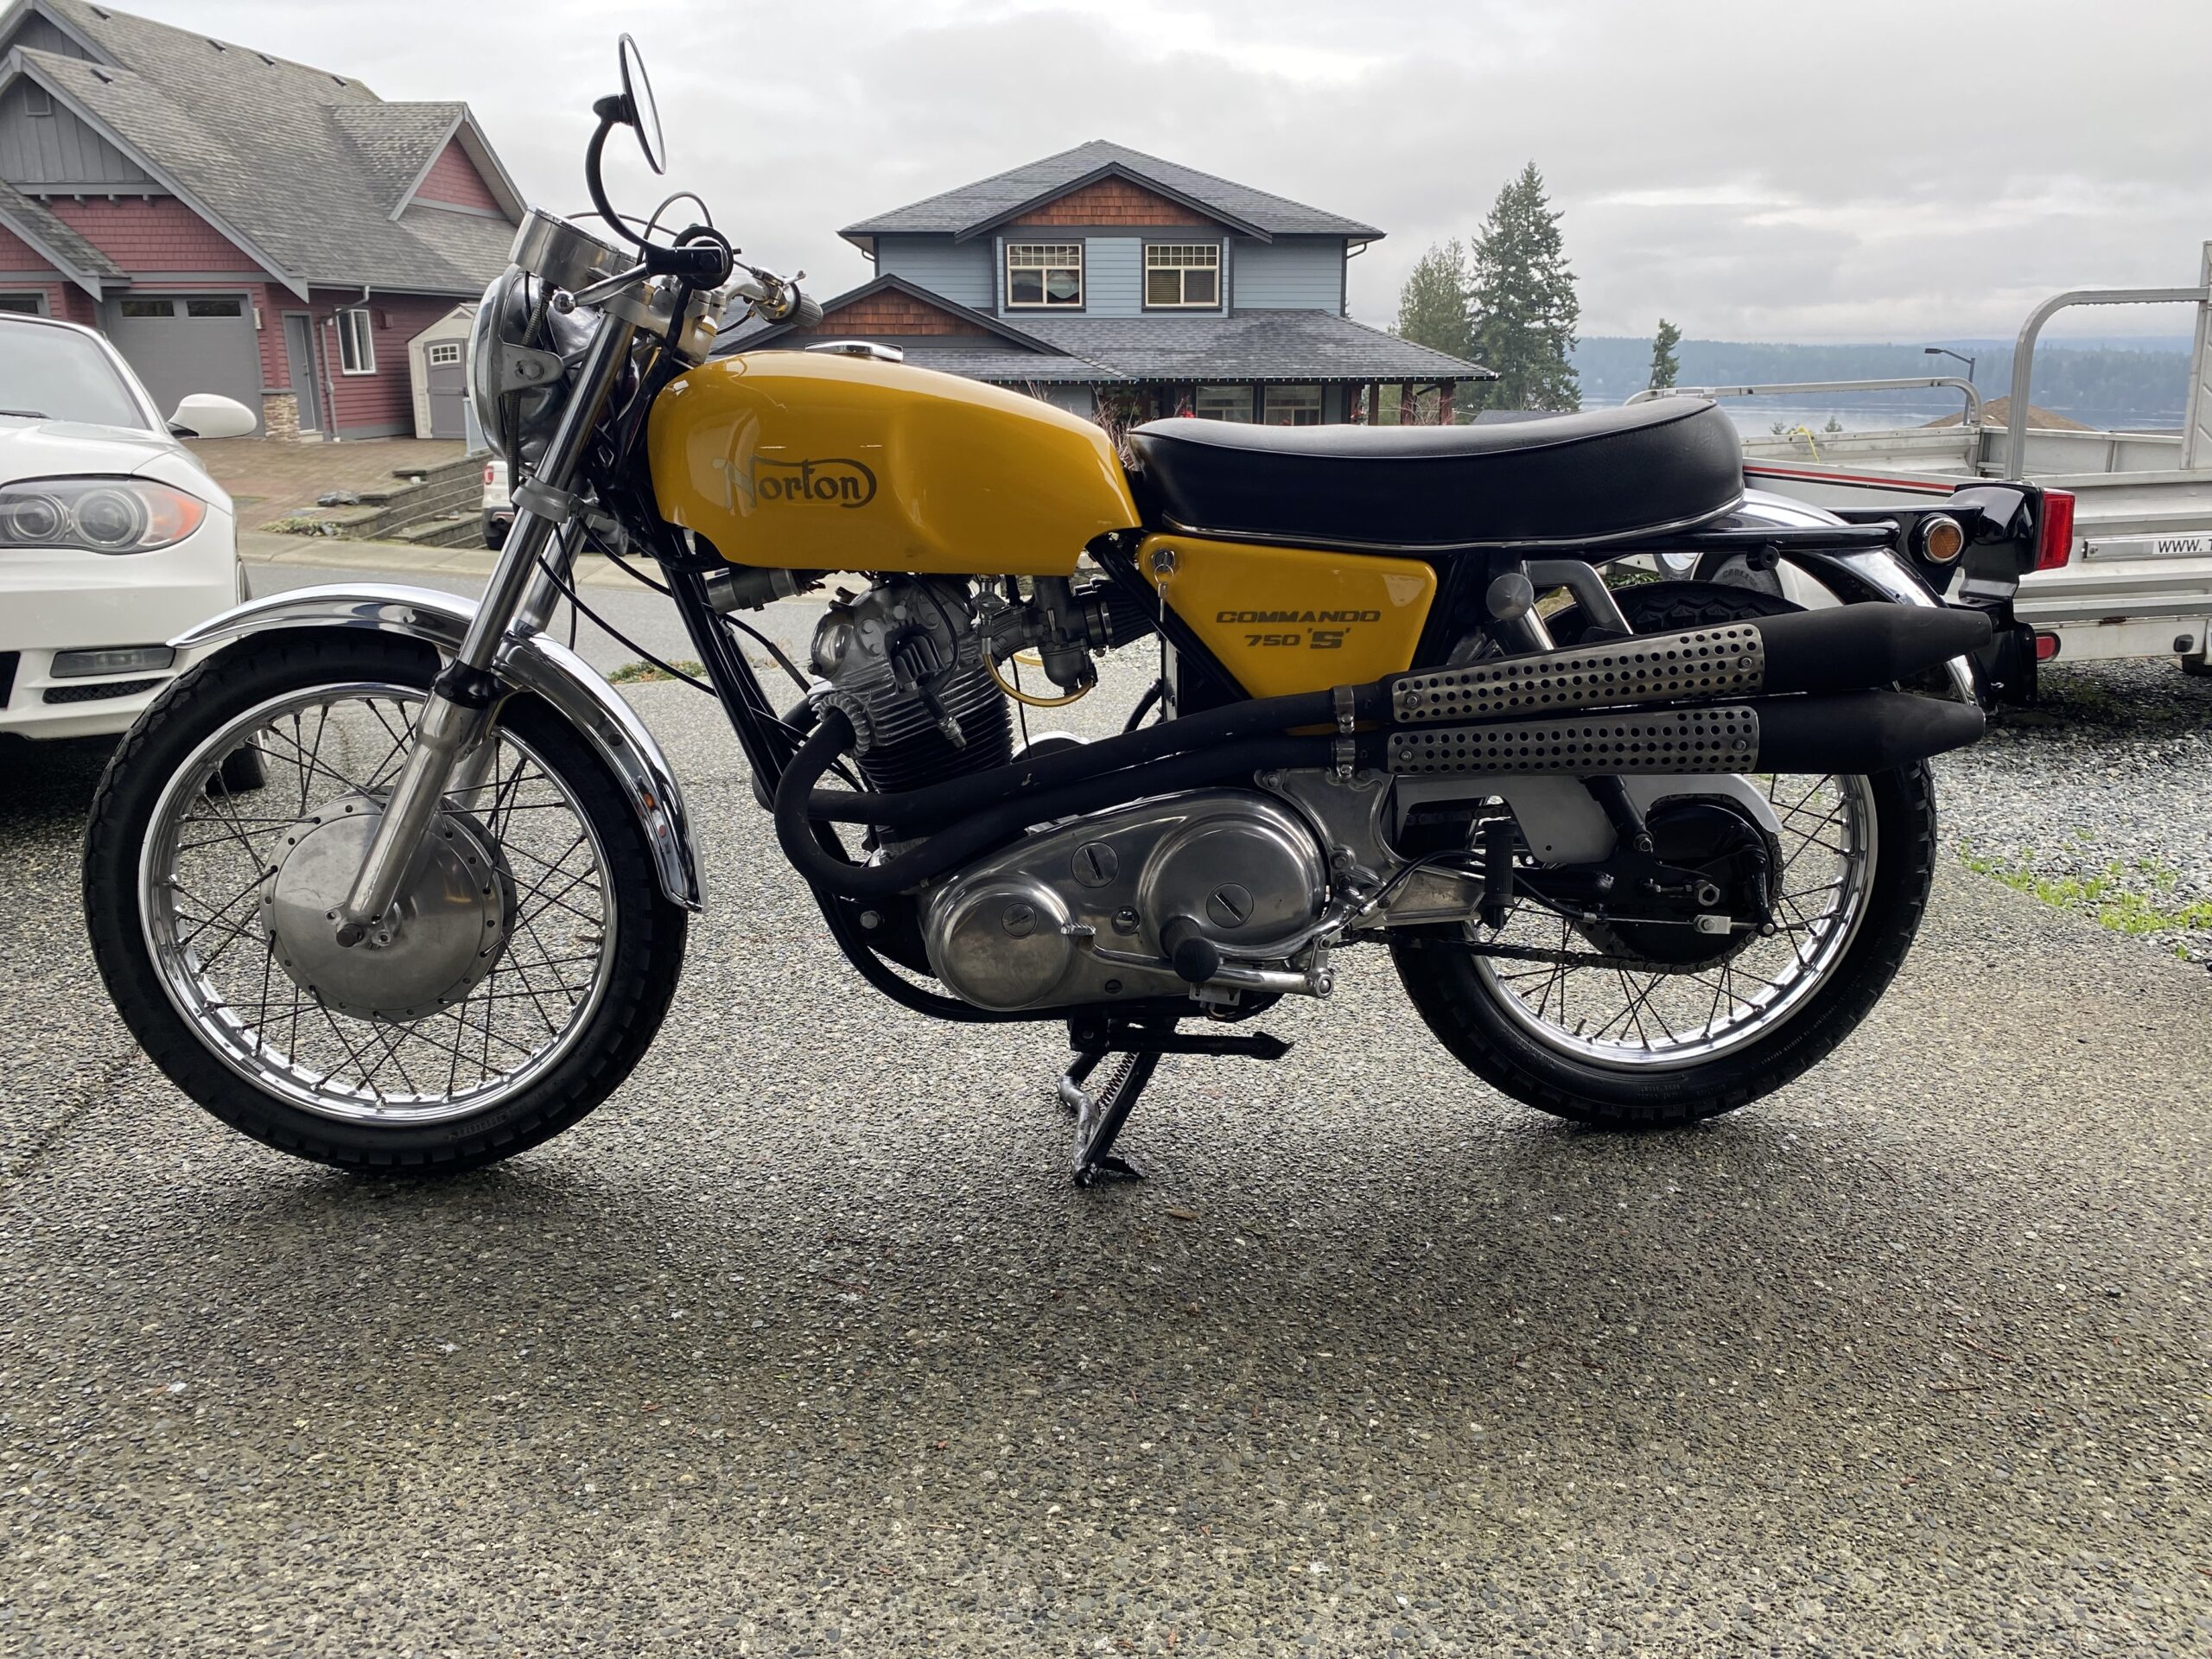 You are currently viewing 1969 Norton Commando “S’ For Sale, $11,000